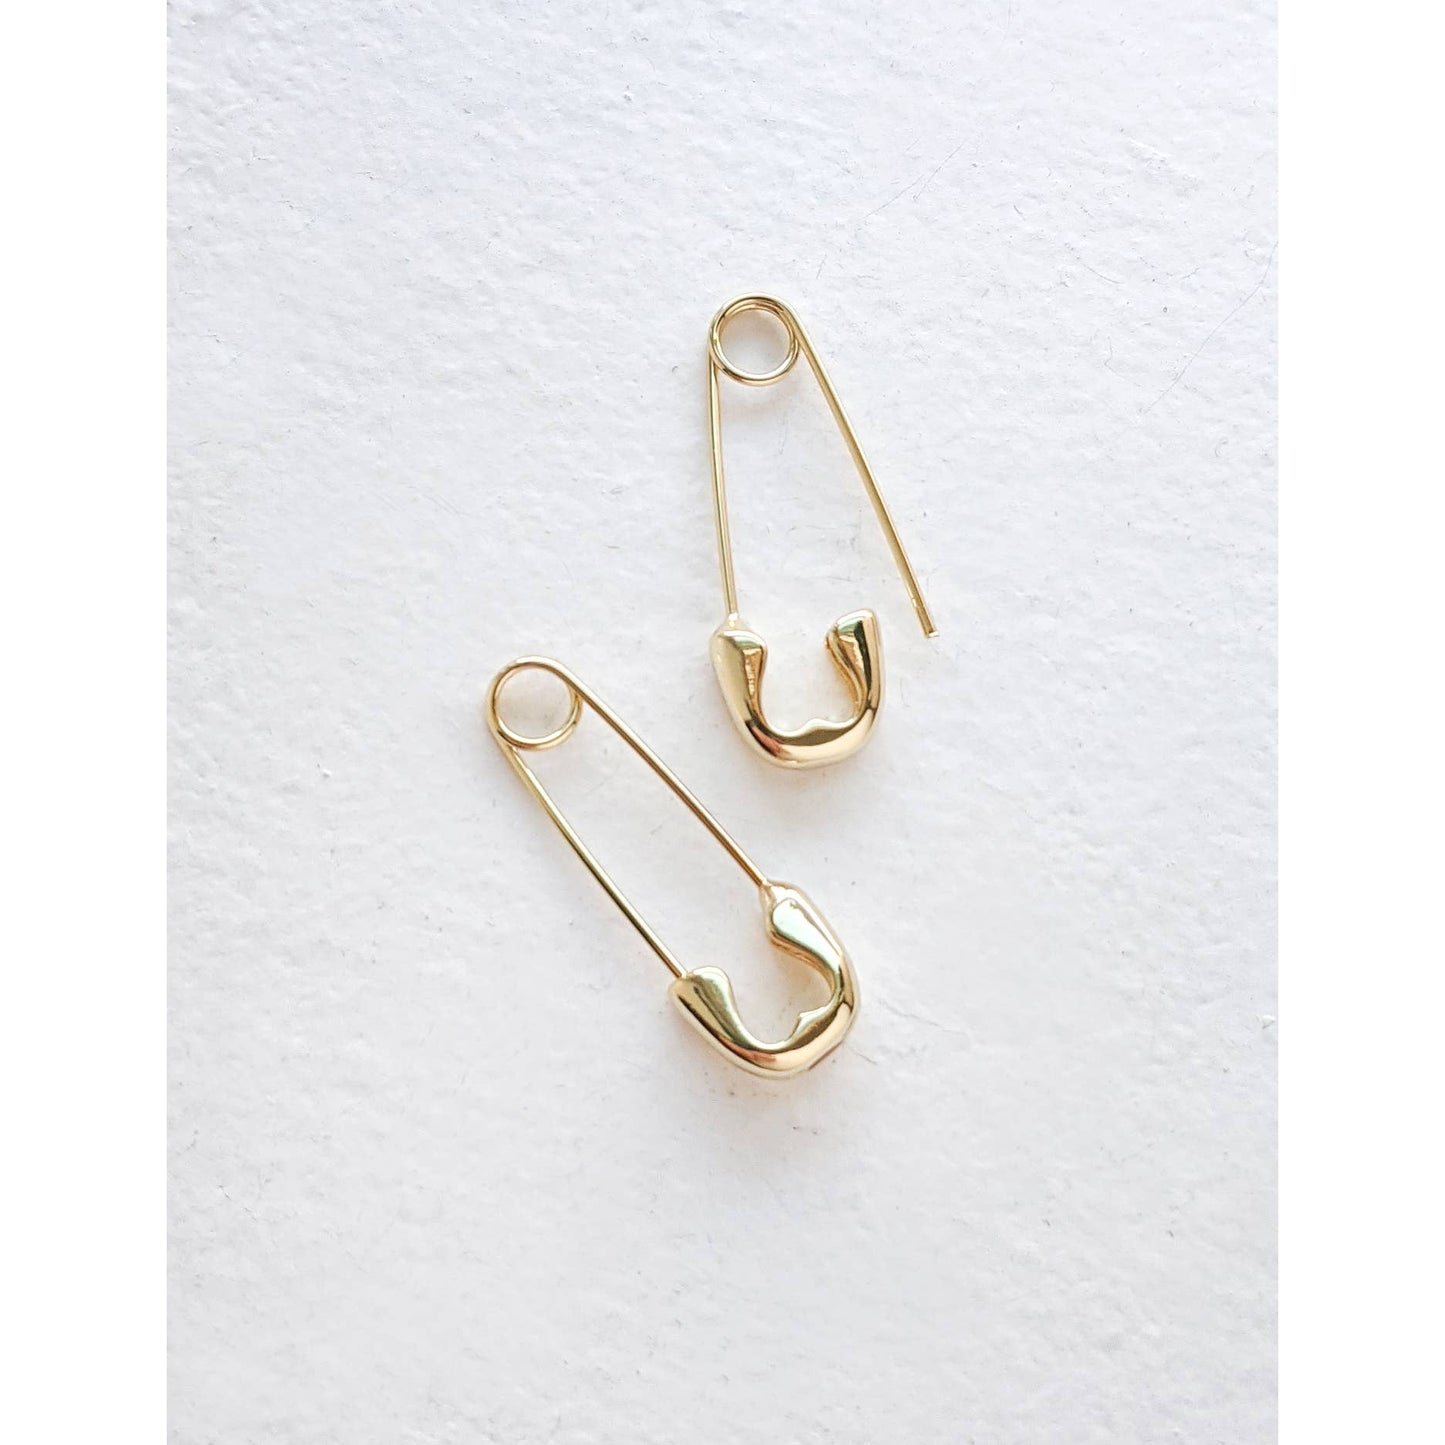 Nuance Jewelry - Safety Pin Earrings